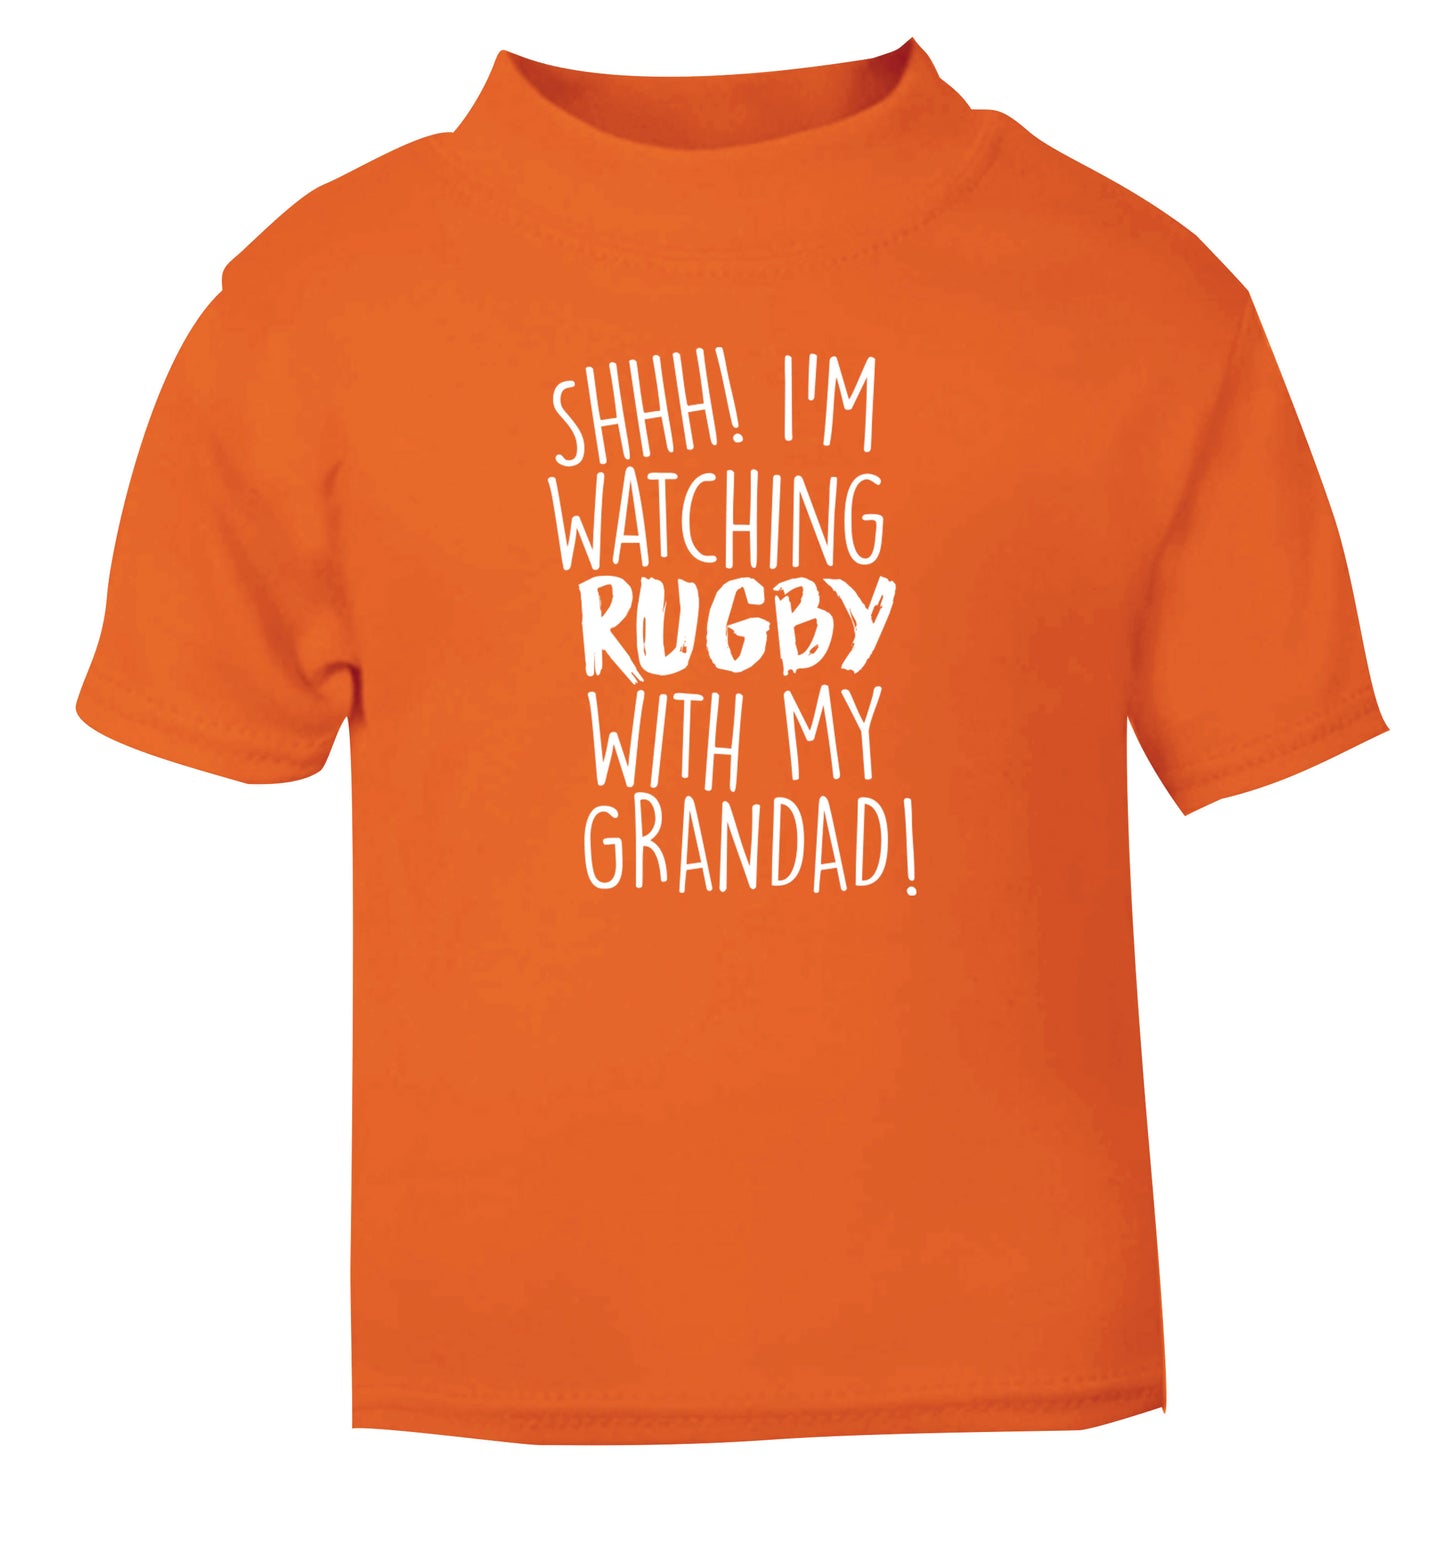 Shh I'm watching rugby with my grandad orange Baby Toddler Tshirt 2 Years